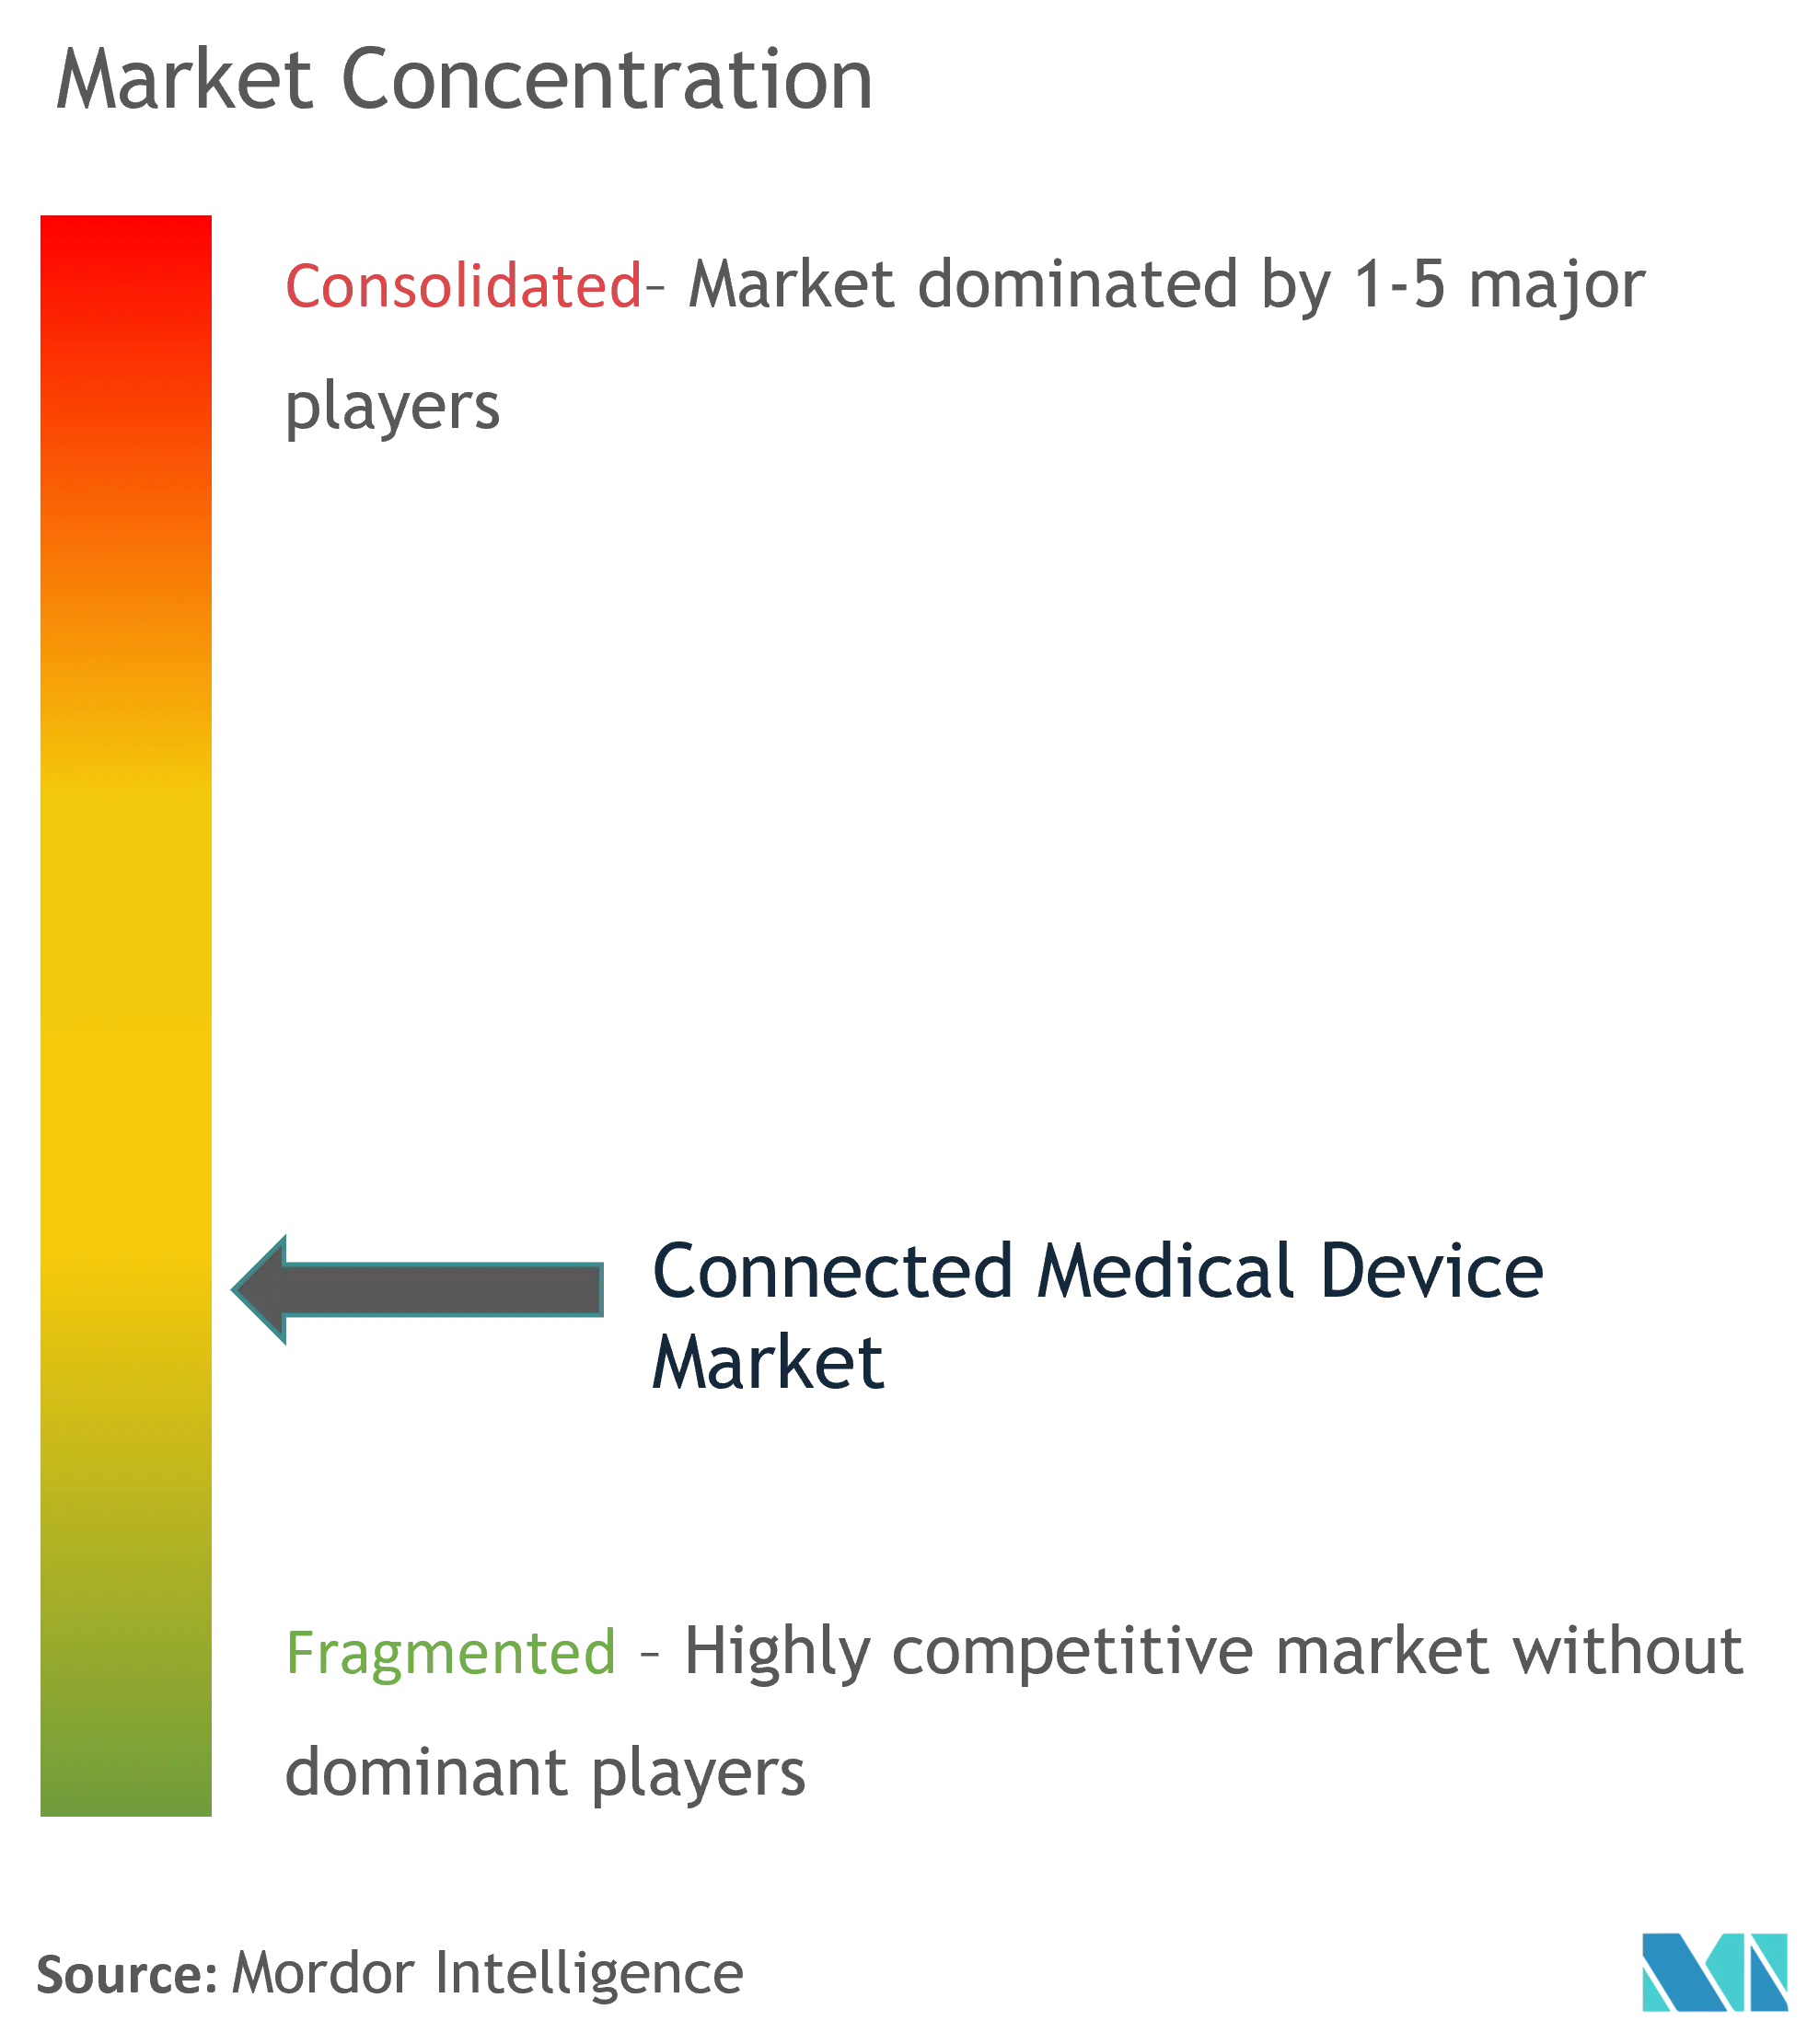 Connected Medical Devices Market Concentration